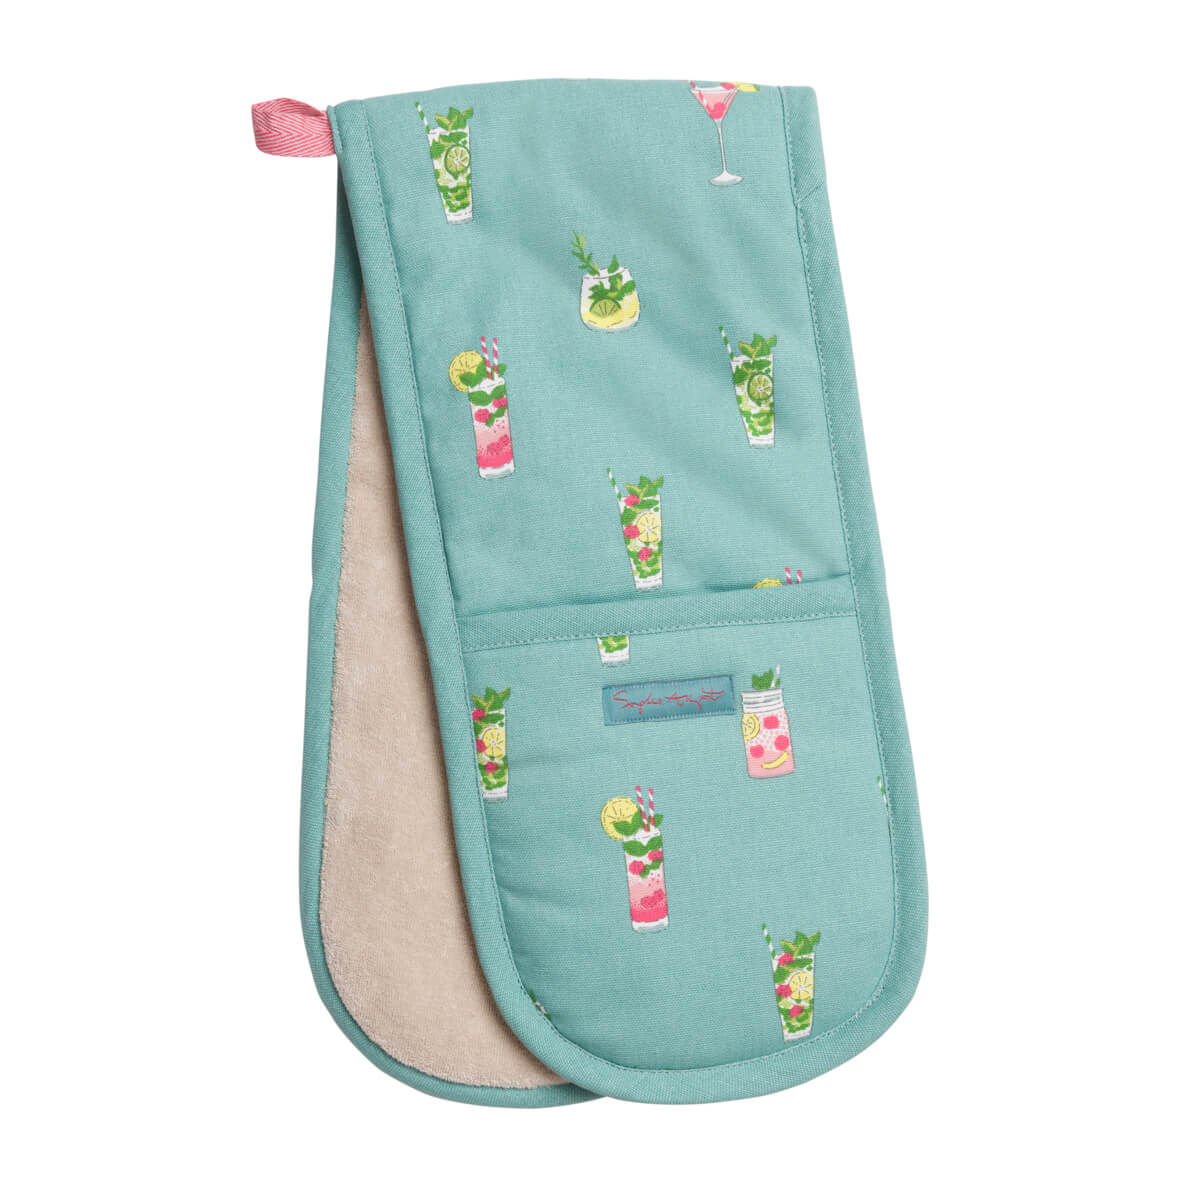 Oven gloves featuring cocktail drinks on a bright aqua coloured cotton.